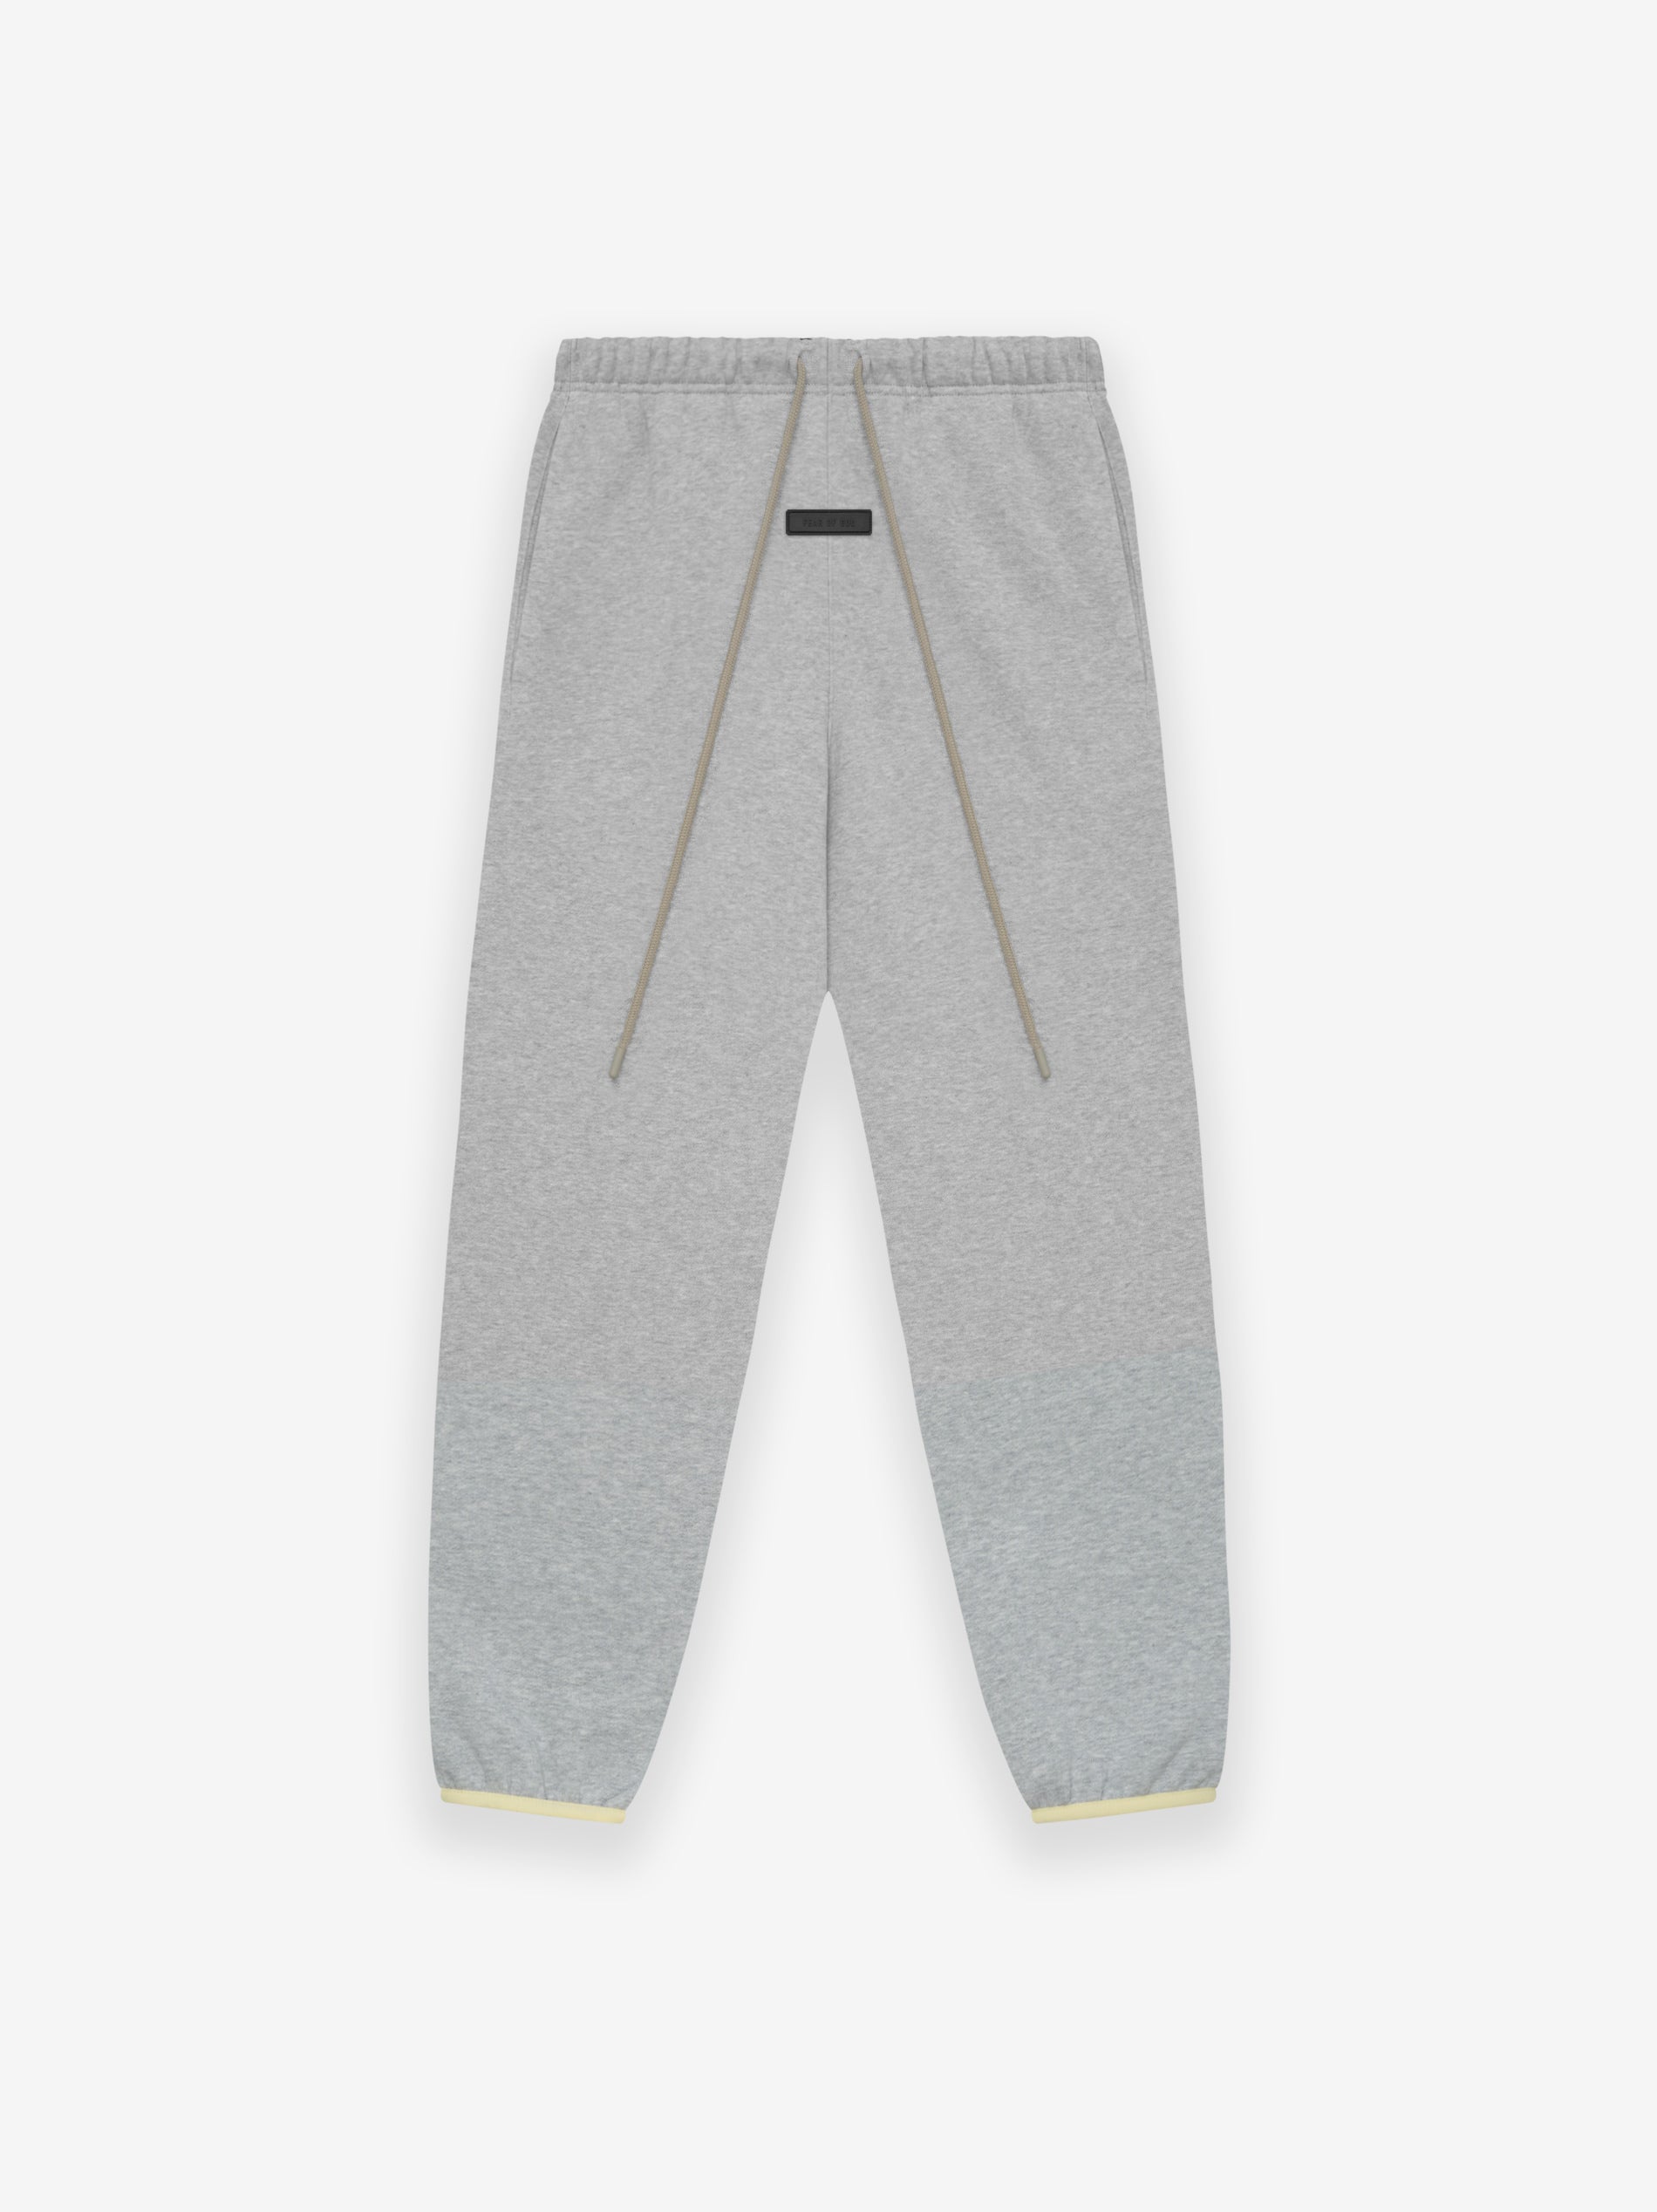 Fear Of God x Nike Sweat Pants Trousers Joggers on Buttons Cotton Gray Size  M